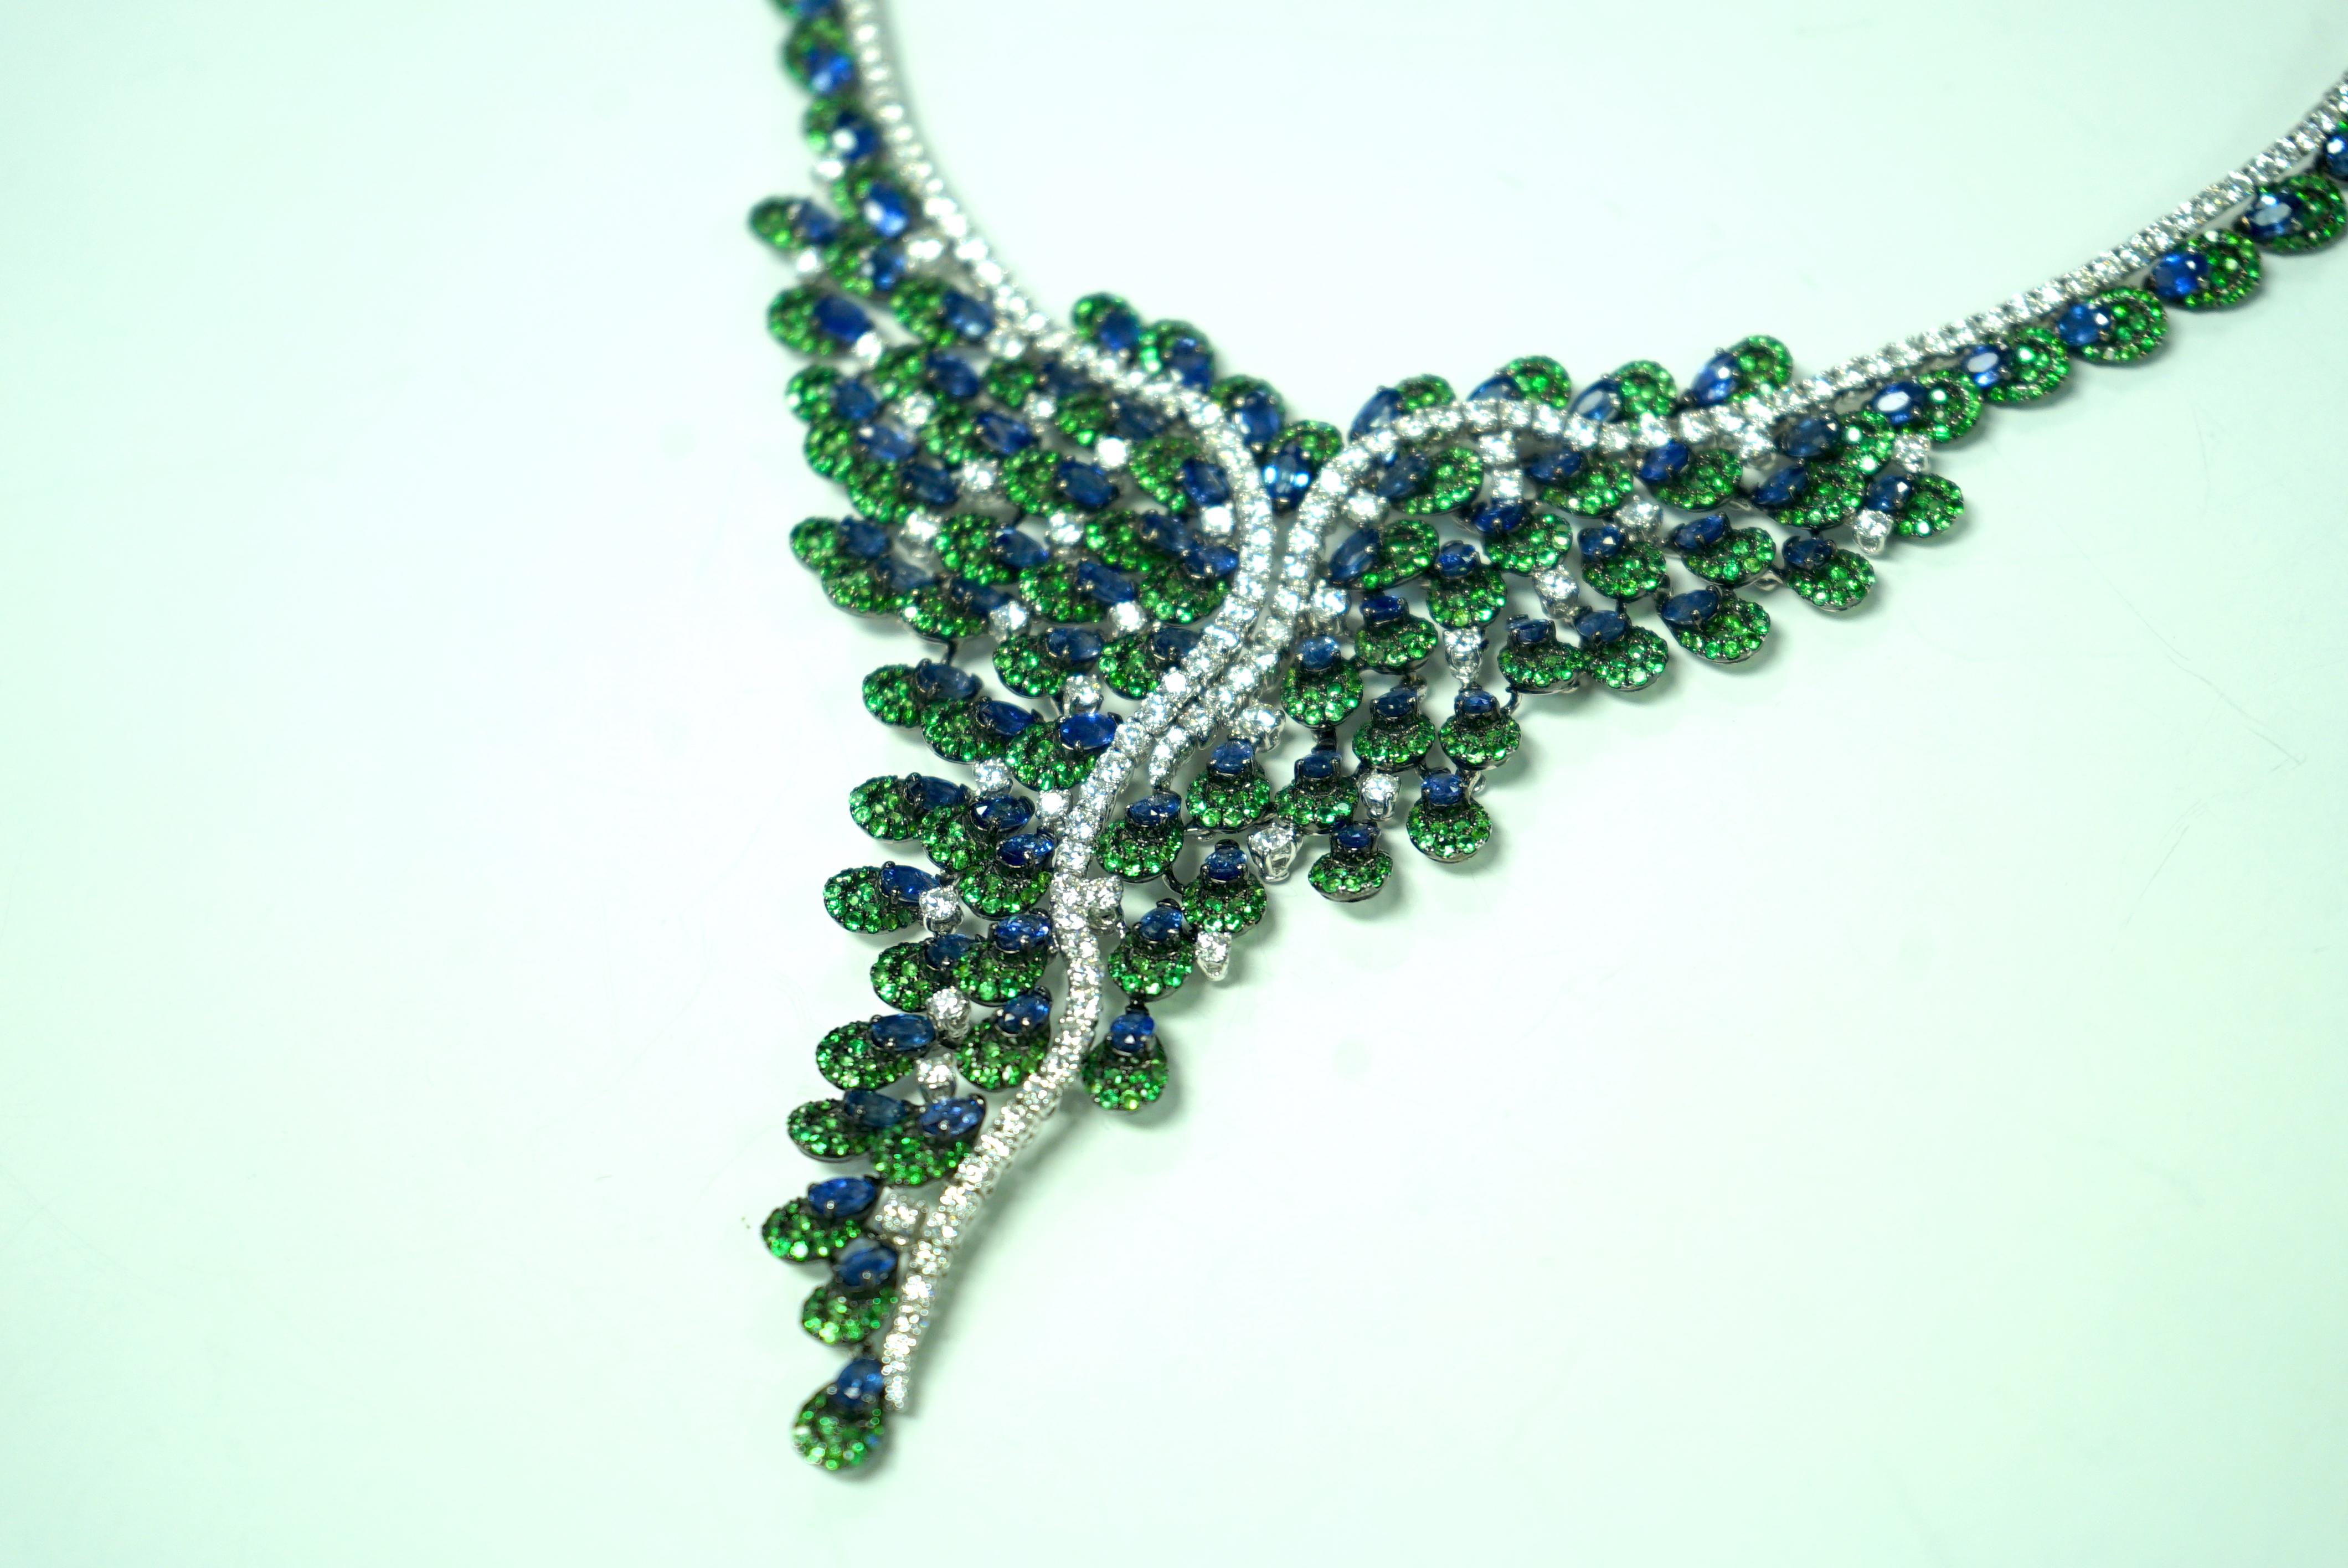 What a magnificent necklace by famed designer Yvel, from the Peacock Collection!  With over 12.00 carats of diamonds and almost 50.00 carats of blue sapphires, this enchanting necklace also features beautiful green tsavorite stones!
The current